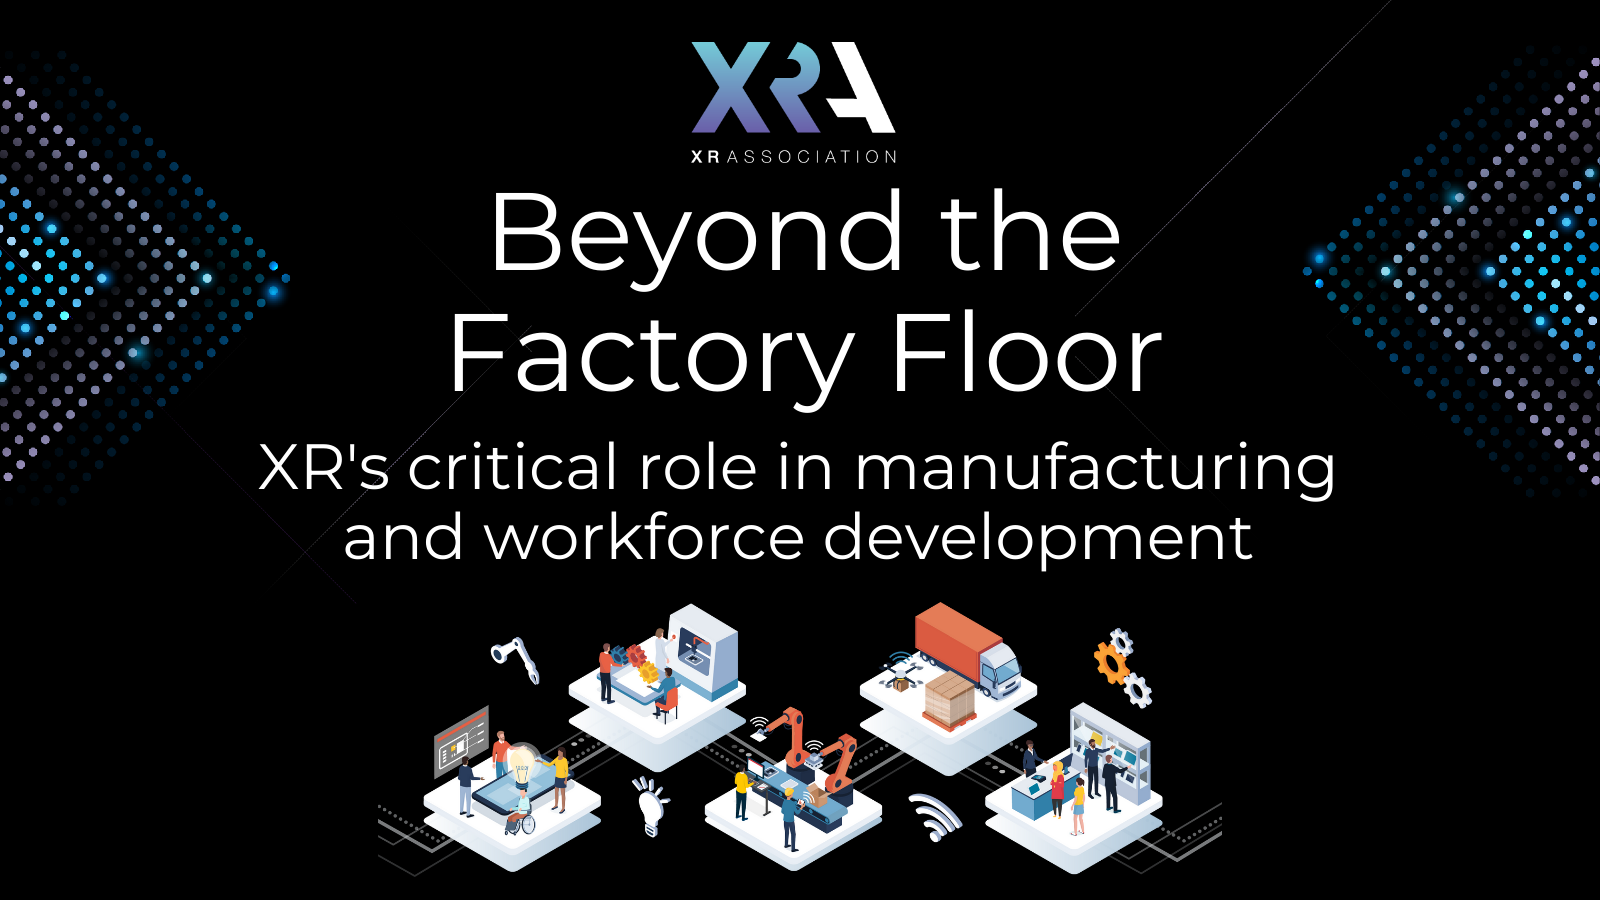 INSIGHTS ON THE FUTURE OF XR IN MANUFACTURING